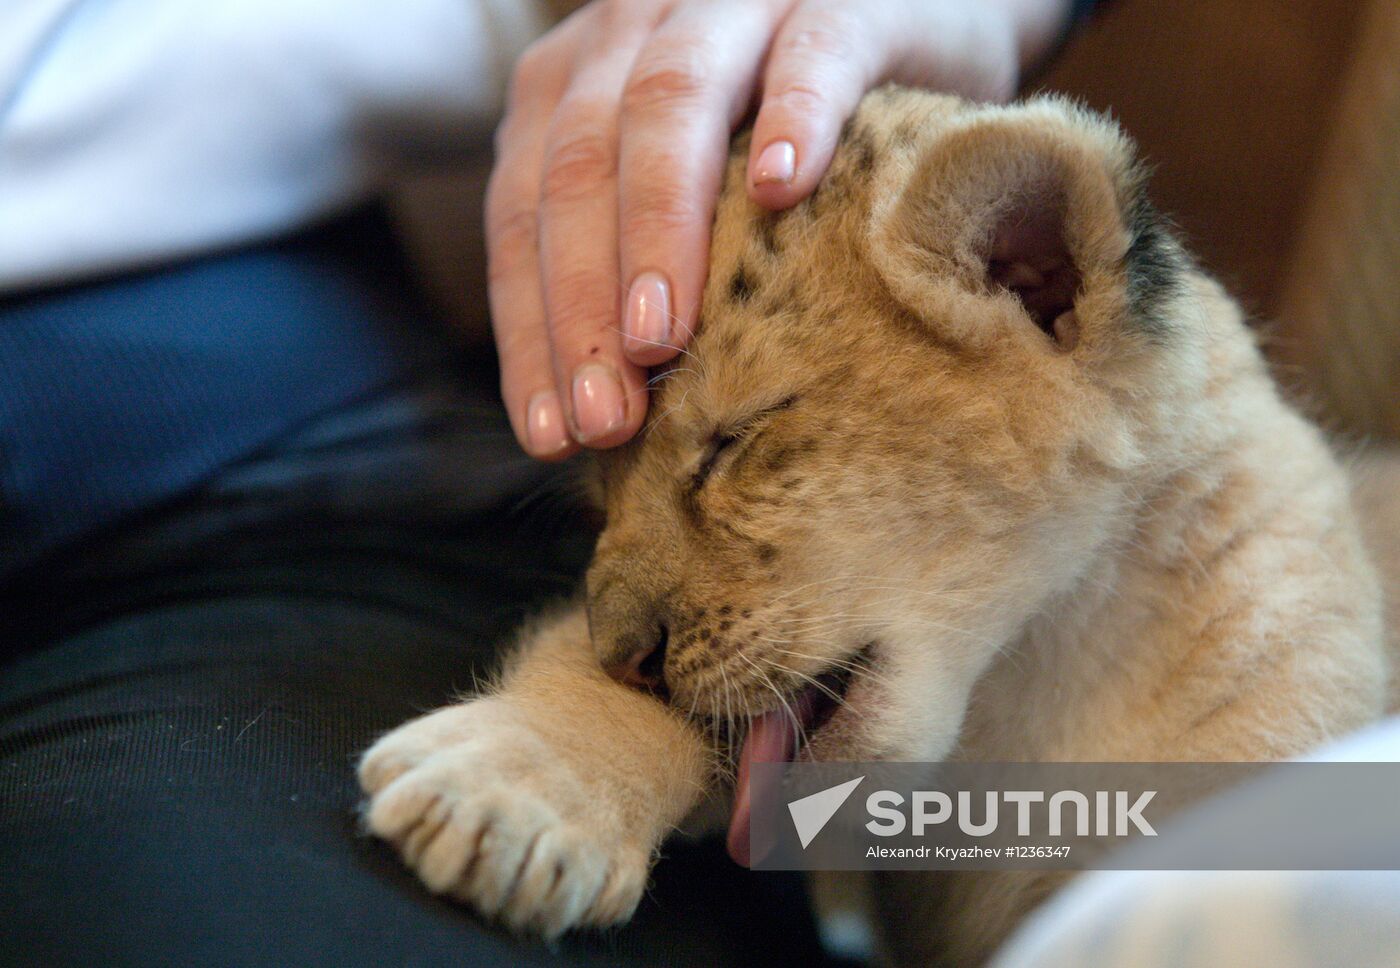 A hybrid cross between ligress and lion born in Novosibirsk Zoo